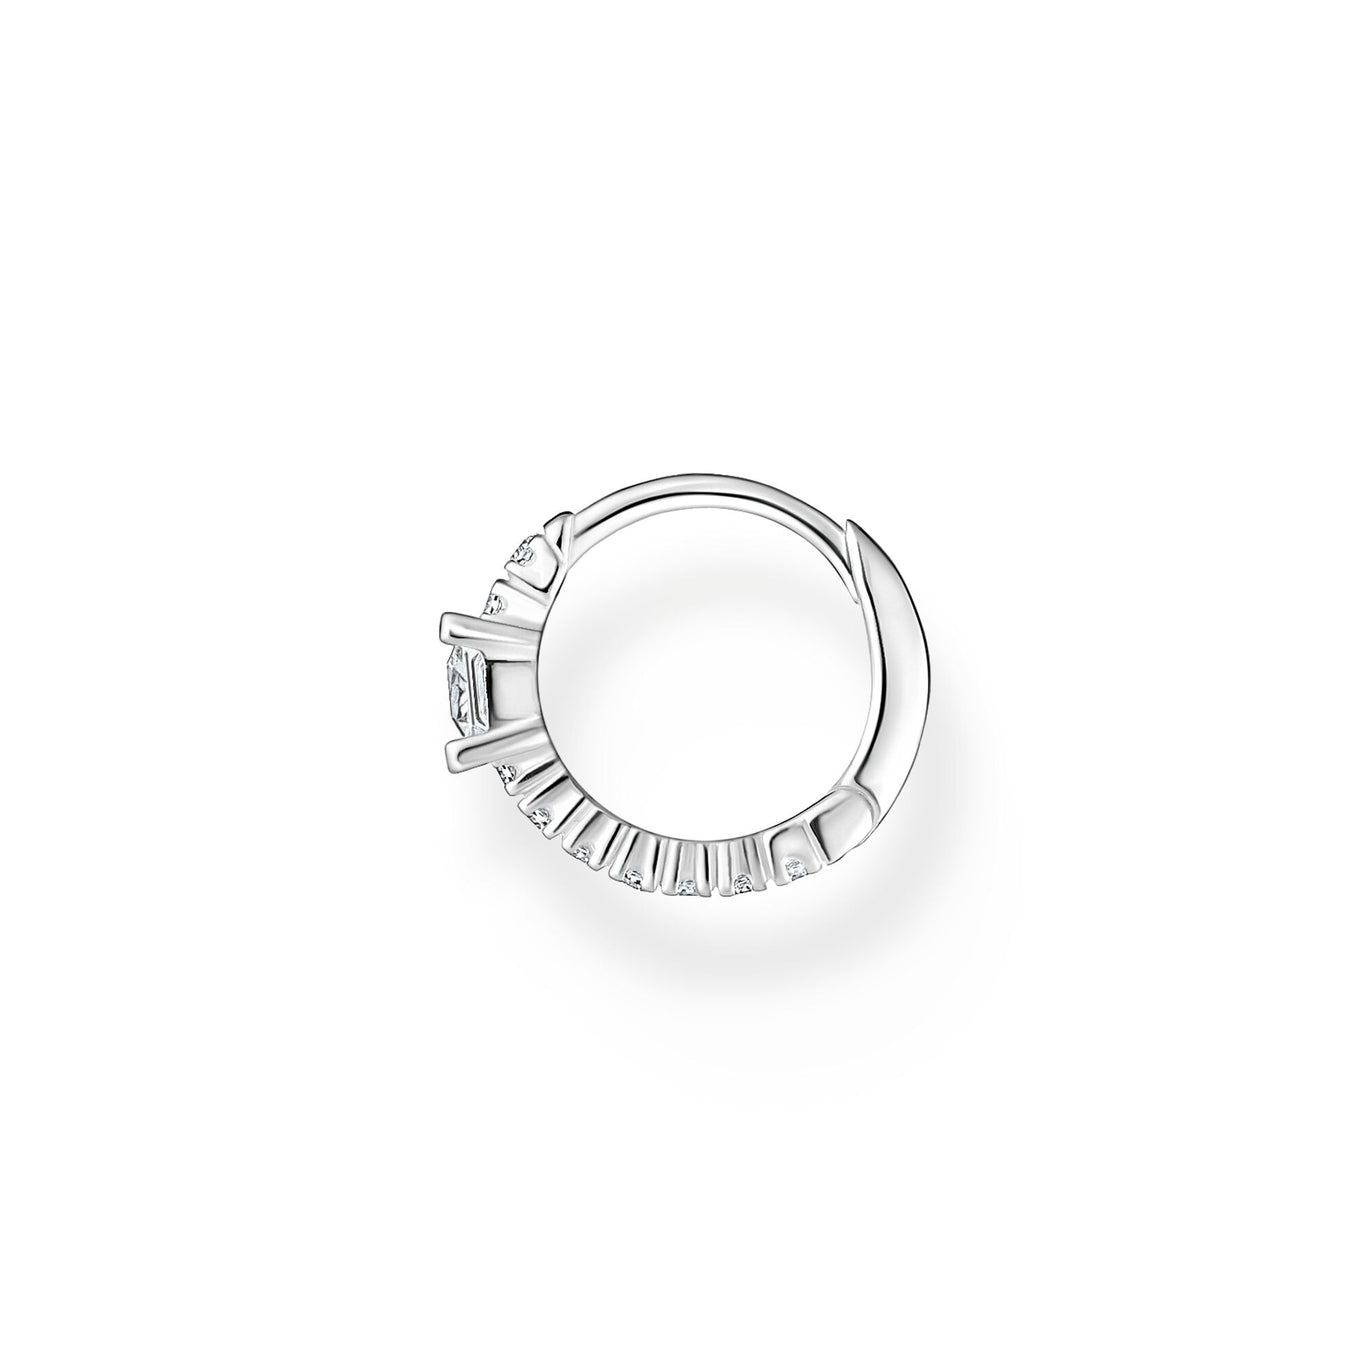 Thomas Sabo Single Hoop Earring with White Stones 13MM